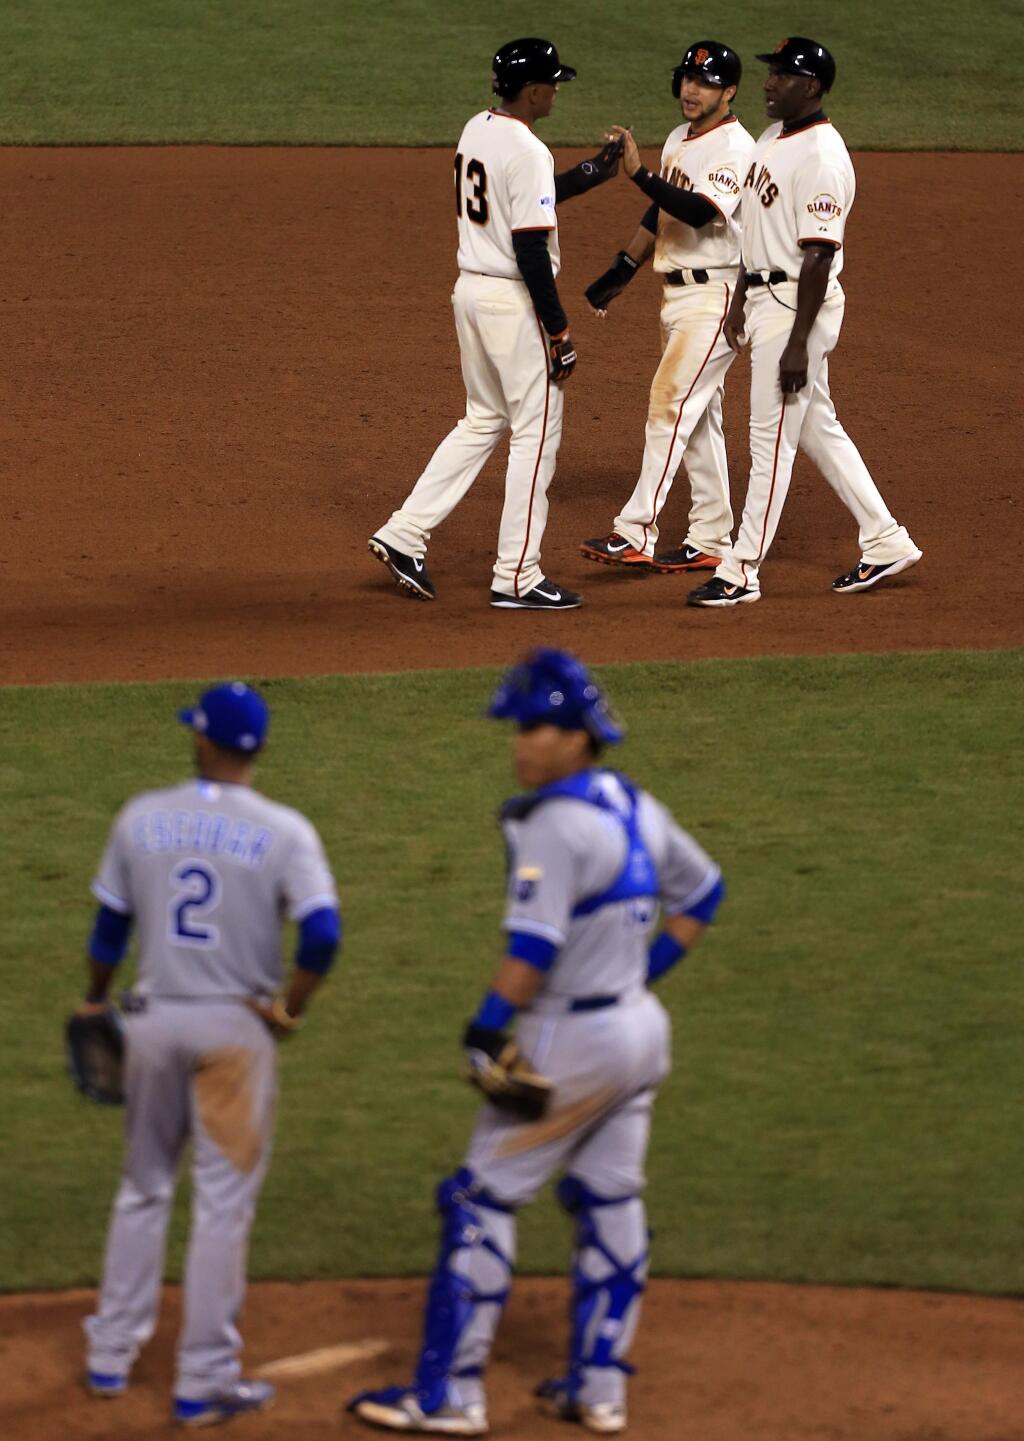 Joaquin Arias, left Gregor Blanco and first base coach Roberto Kelly during a replay call during game 4 of the World Series in San Francisco, Saturday Oct. 25, 2014. (Kent Porter / Press Democrat) 2014